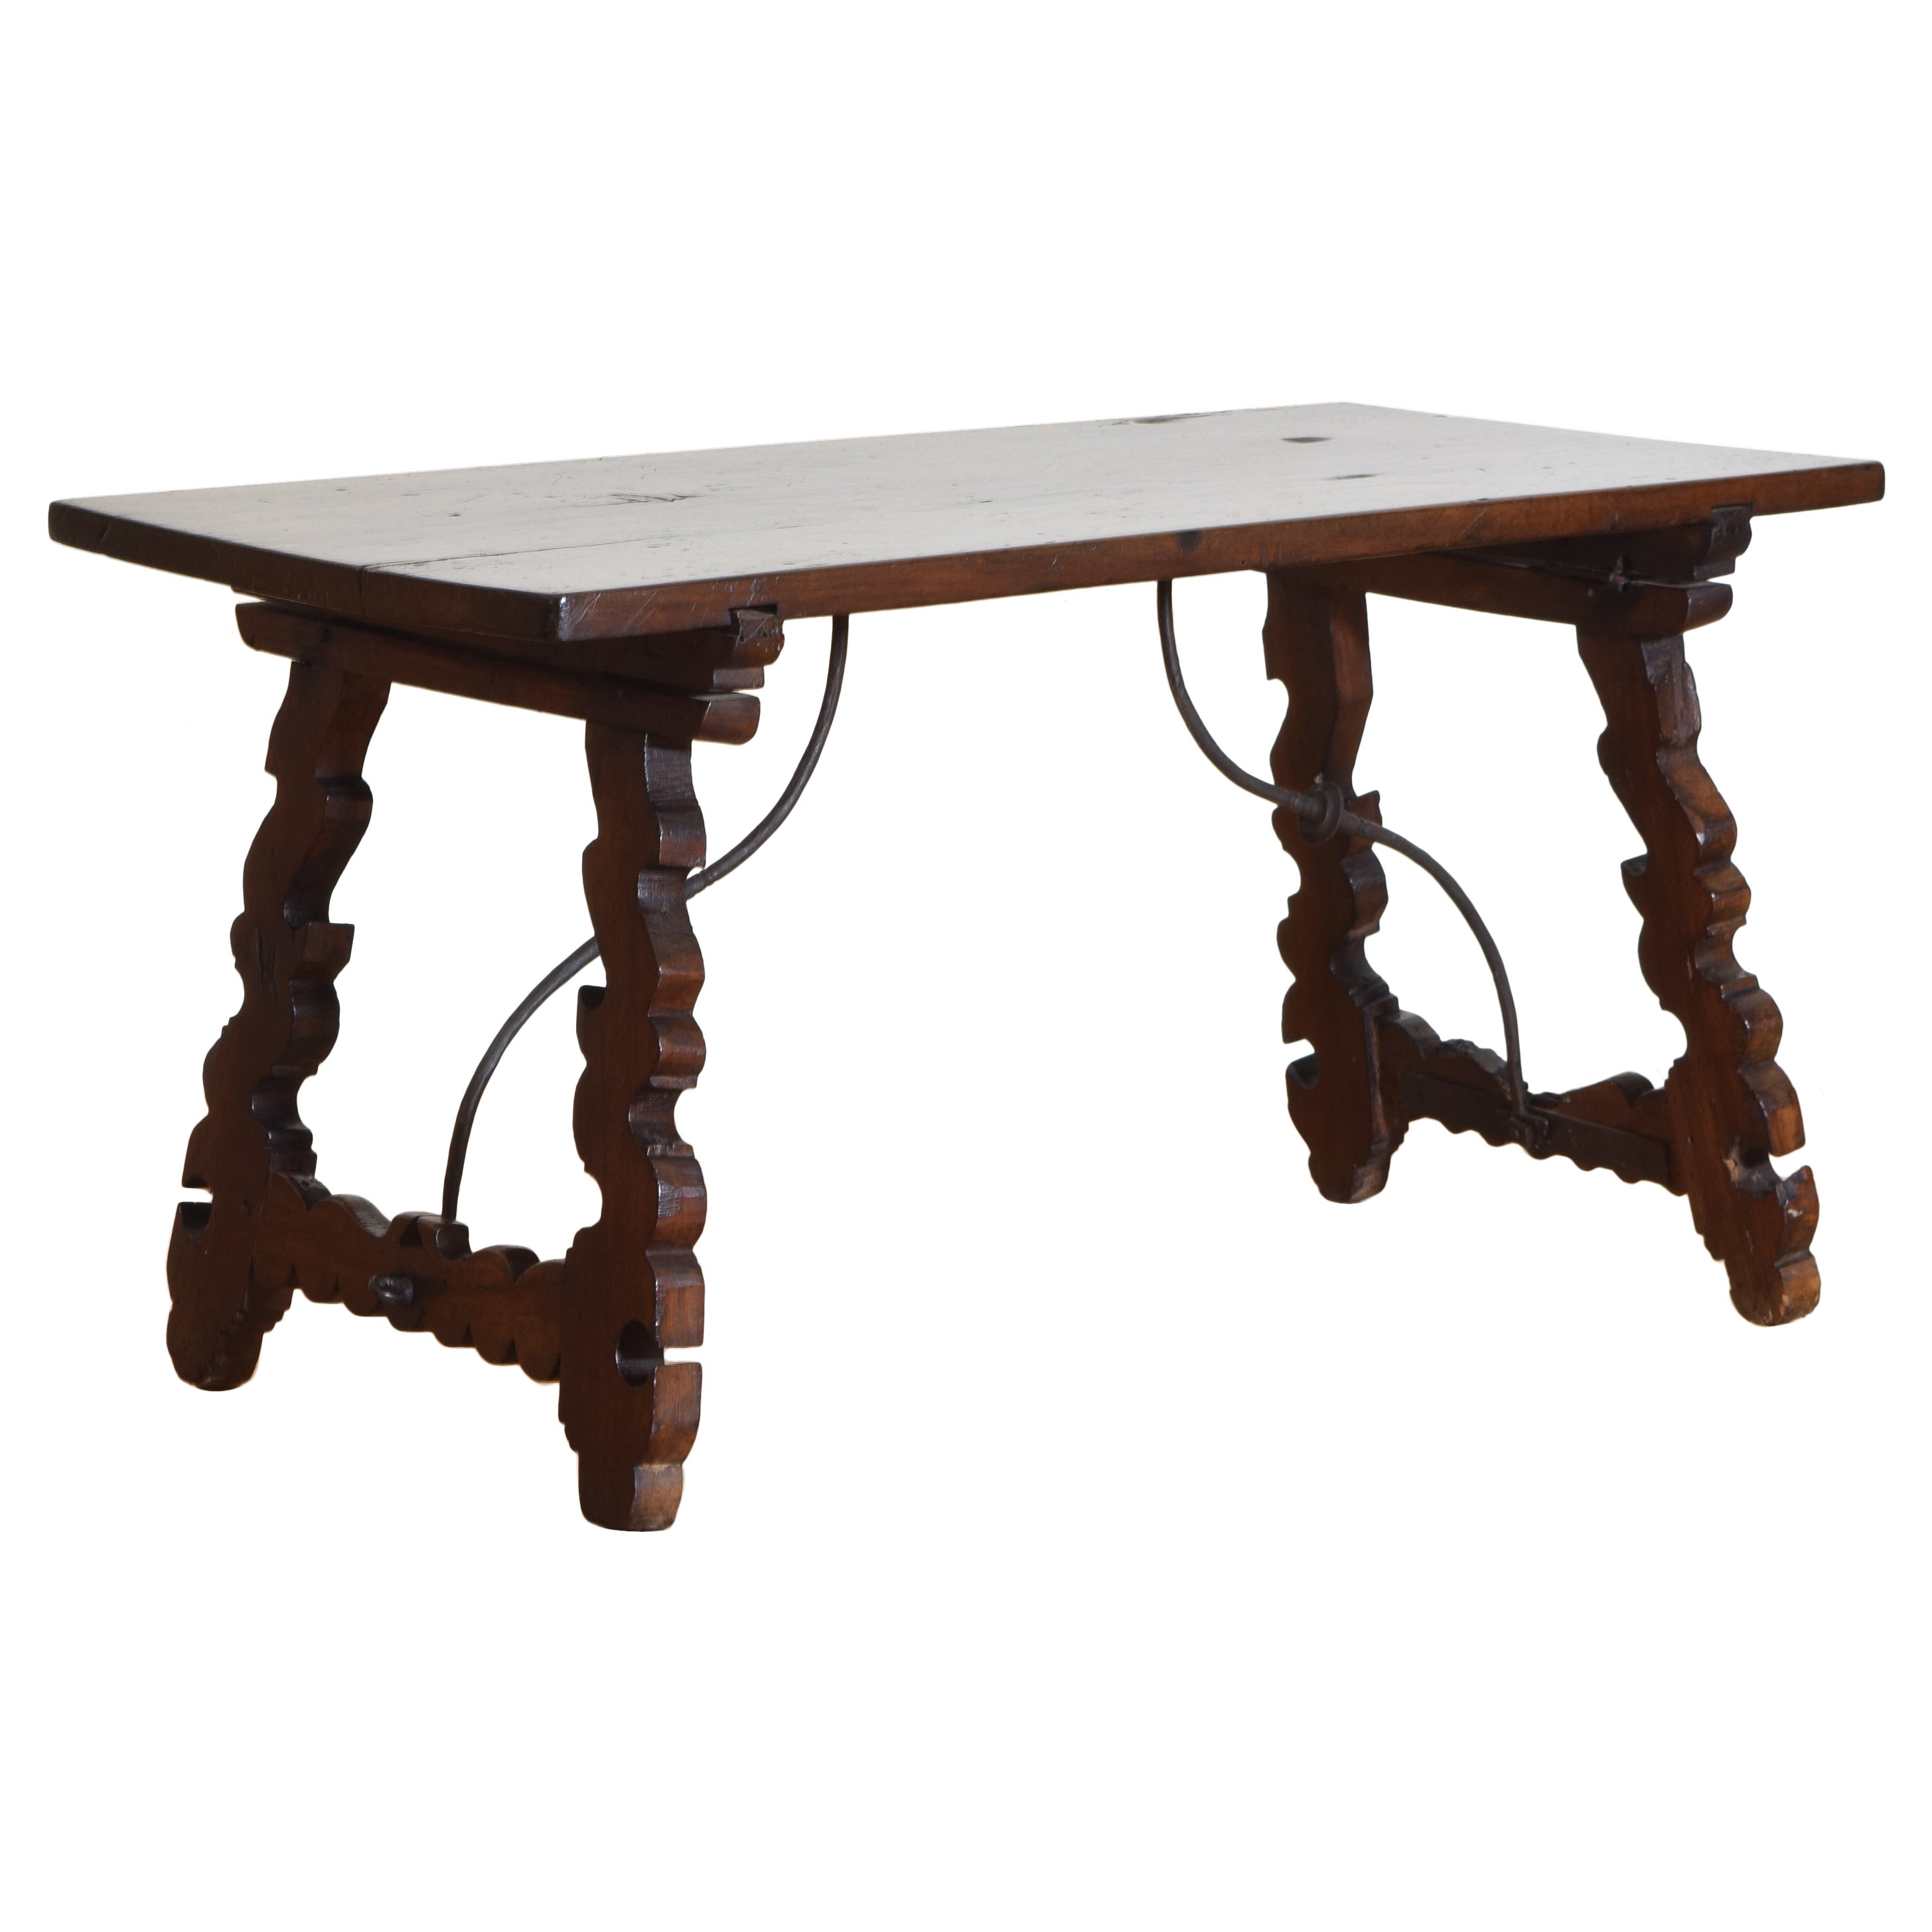 Italian Baroque Style Carved Walnut and Wrought Iron Trestle Coffee Table